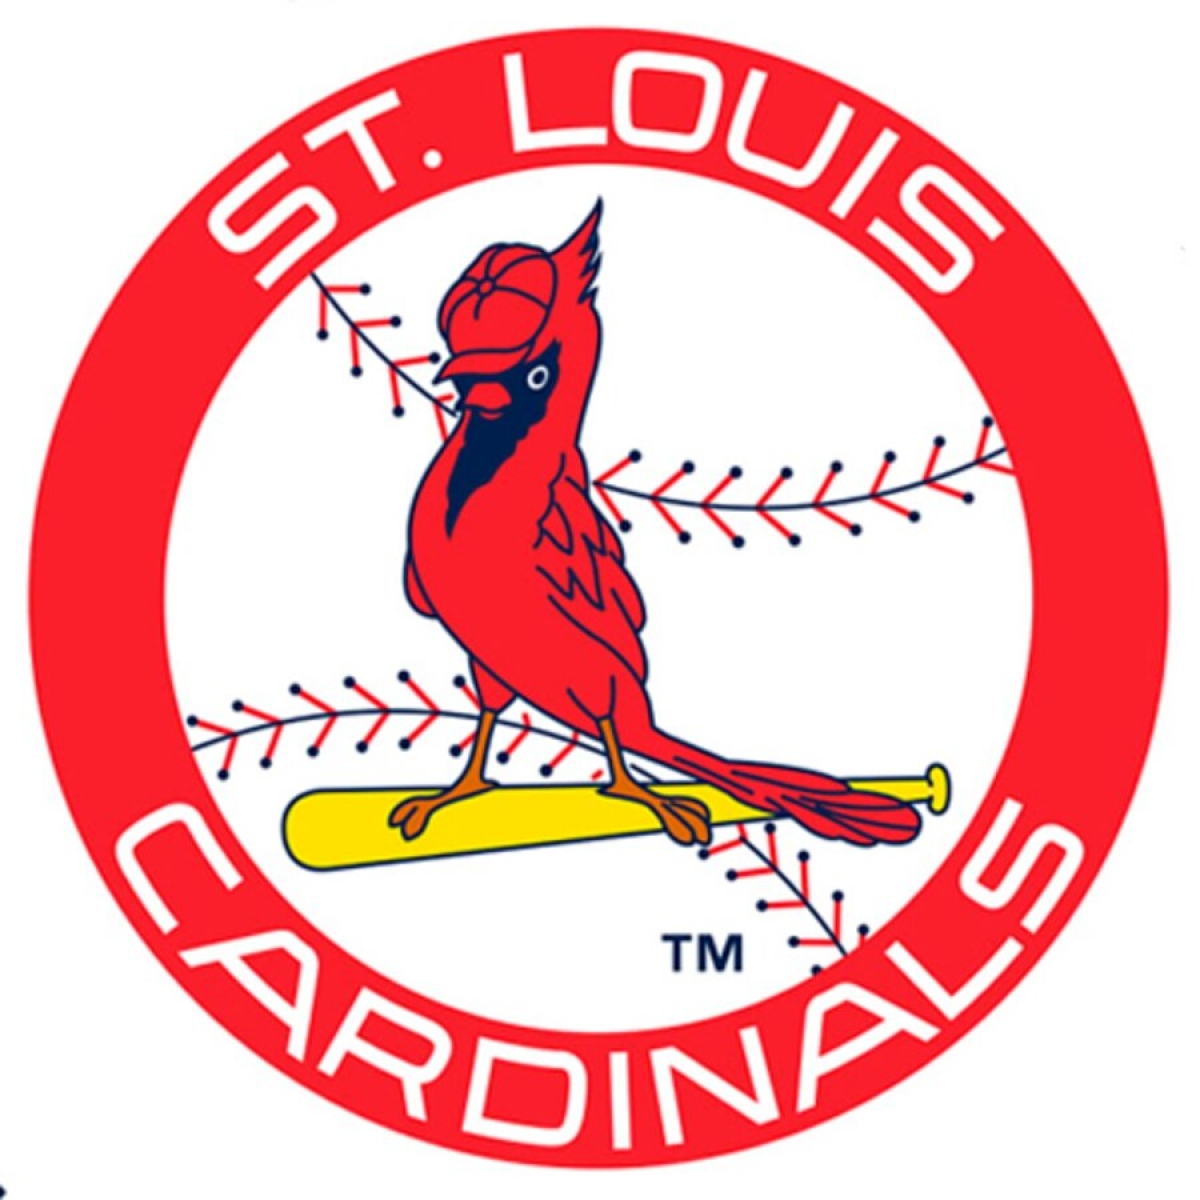 Not in Hall of Fame - The St. Louis Cardinals HOF announce their 2020 Finalists